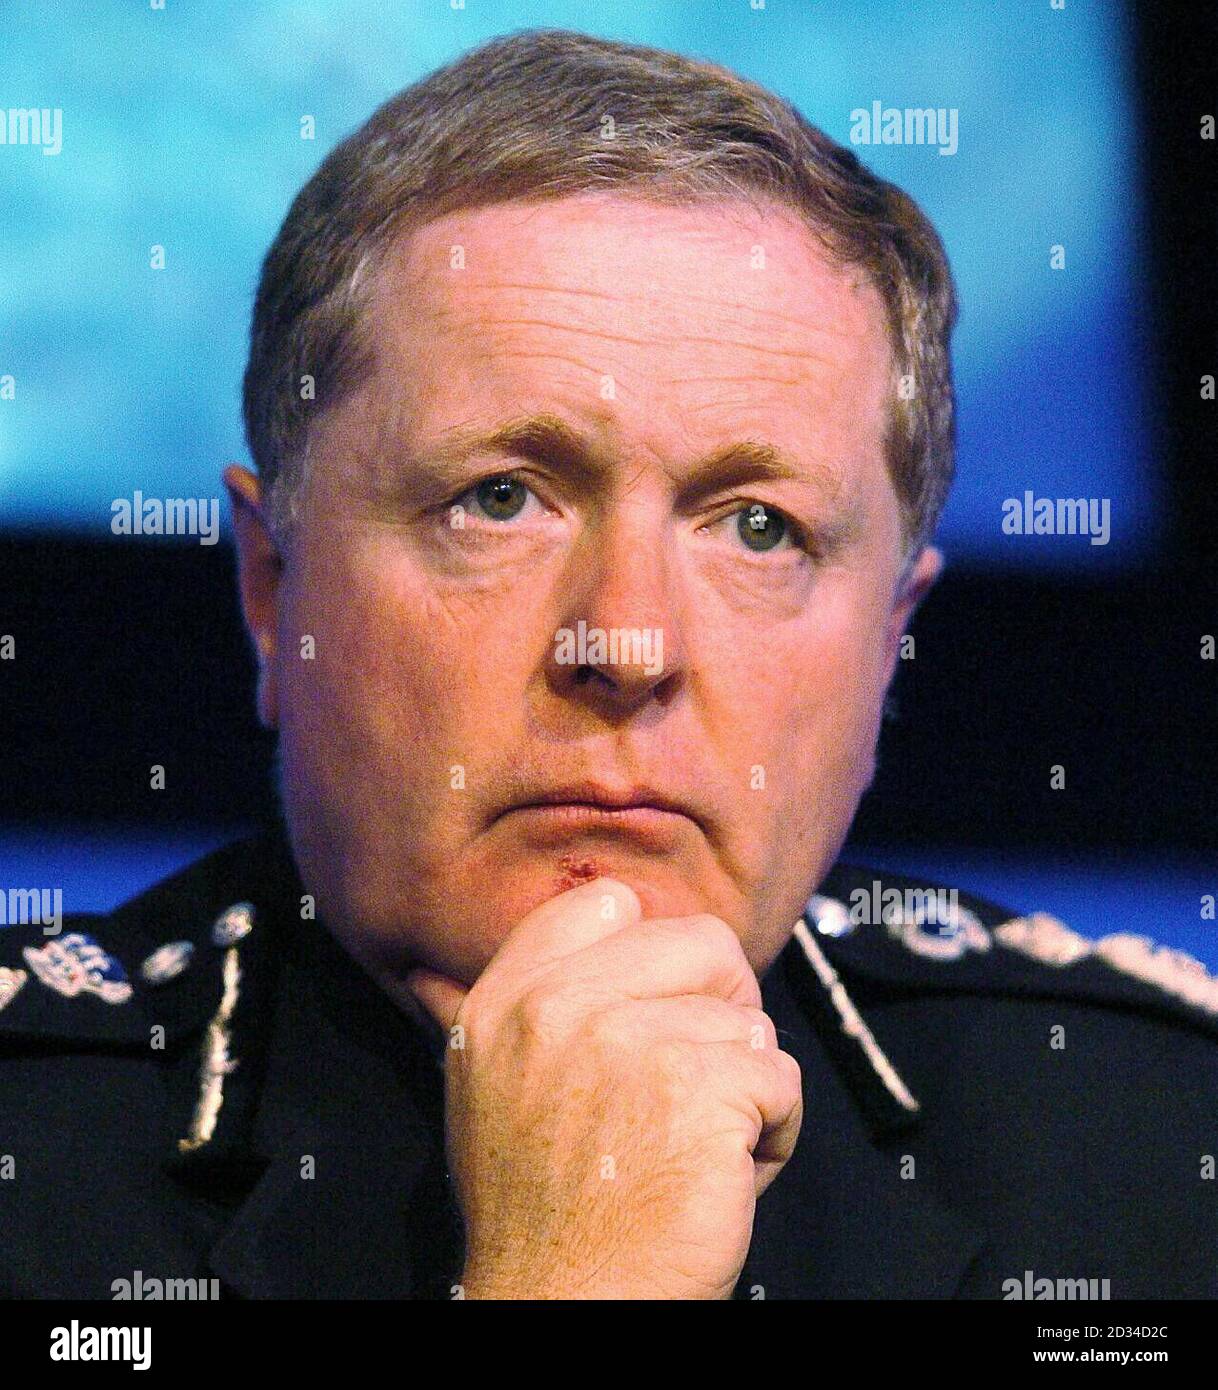 Metropolitan Police Commissioner Sir Ian Blair. He told the media that the shooting of a man on the London Underground at Stockwell Underground Station was 'directly linked' to an anti-terror operation. Stock Photo